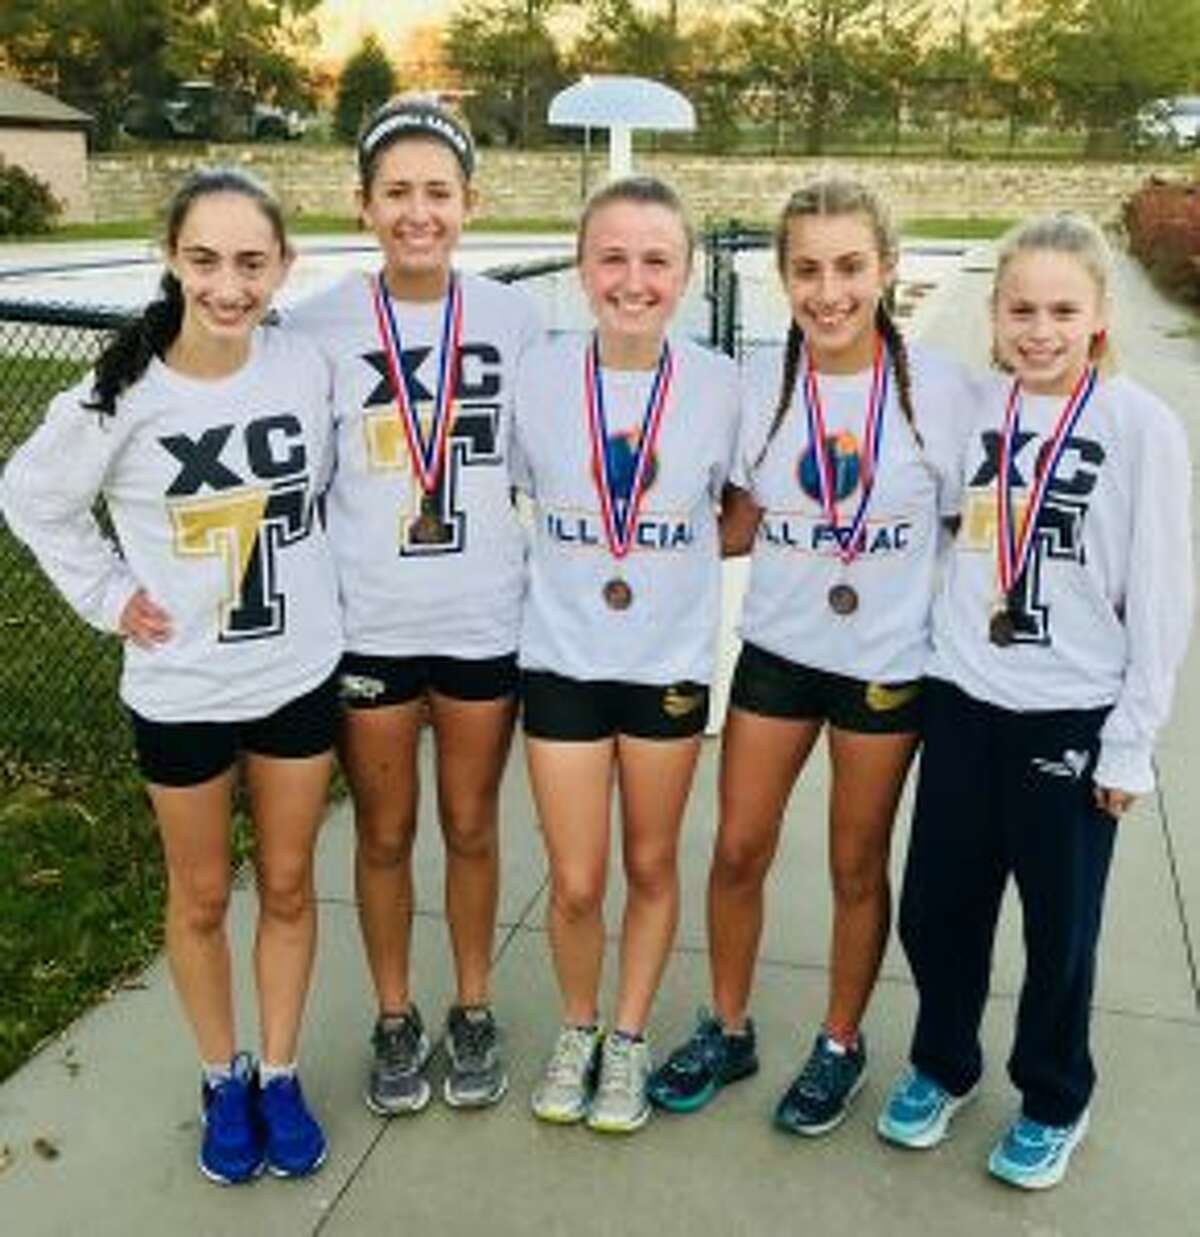 Trumbull’s top five varsity runners, Brenna Asaro, Ashley Storino, Maggie LoSchiavo, Ally Zaffina and Kiki Grant, posted the fastest team combined time in school history at the FCIAC Championship Meet on Oct. 18.